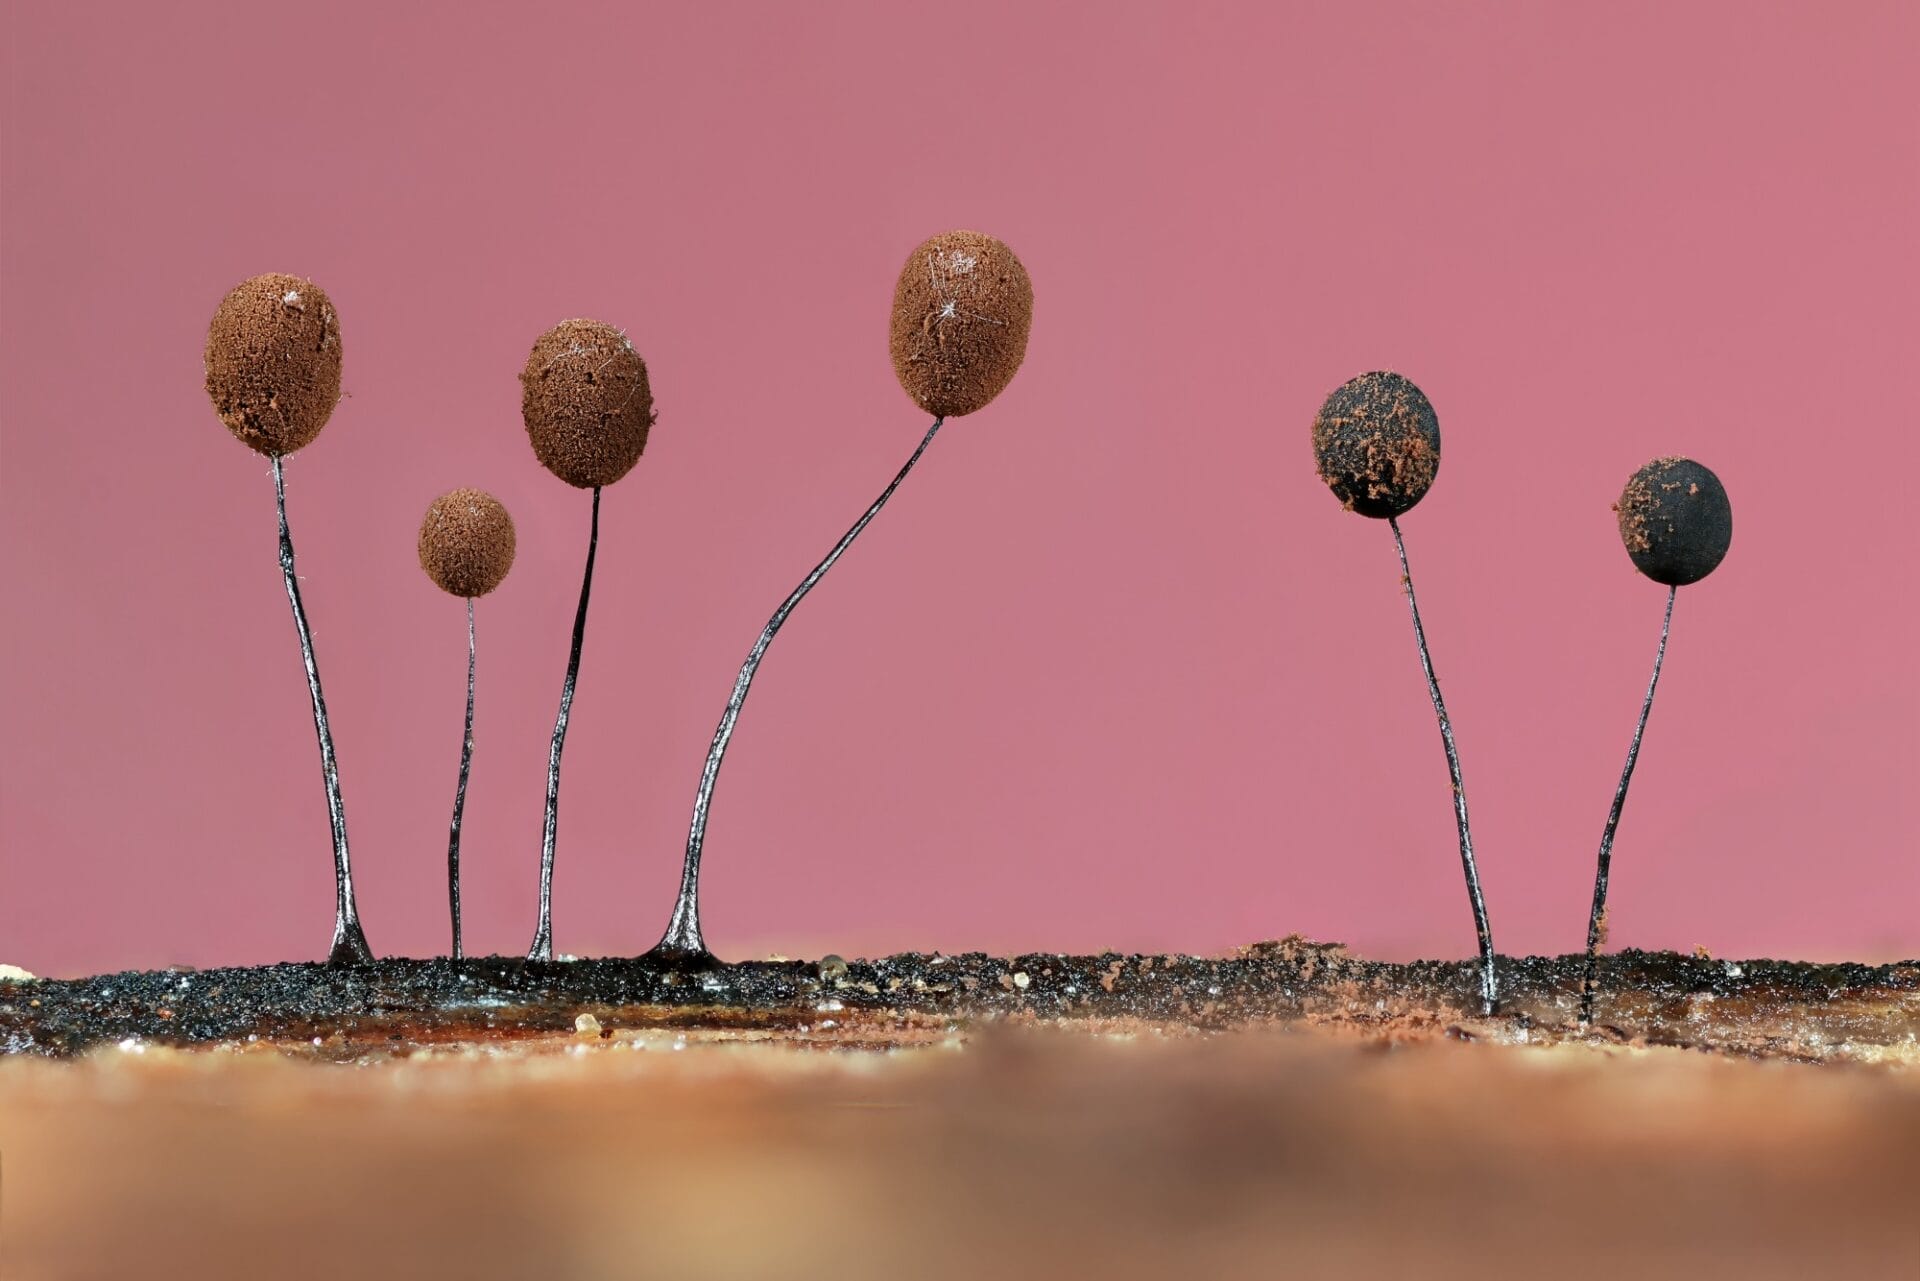 tiny slime mold photographed against a pink background